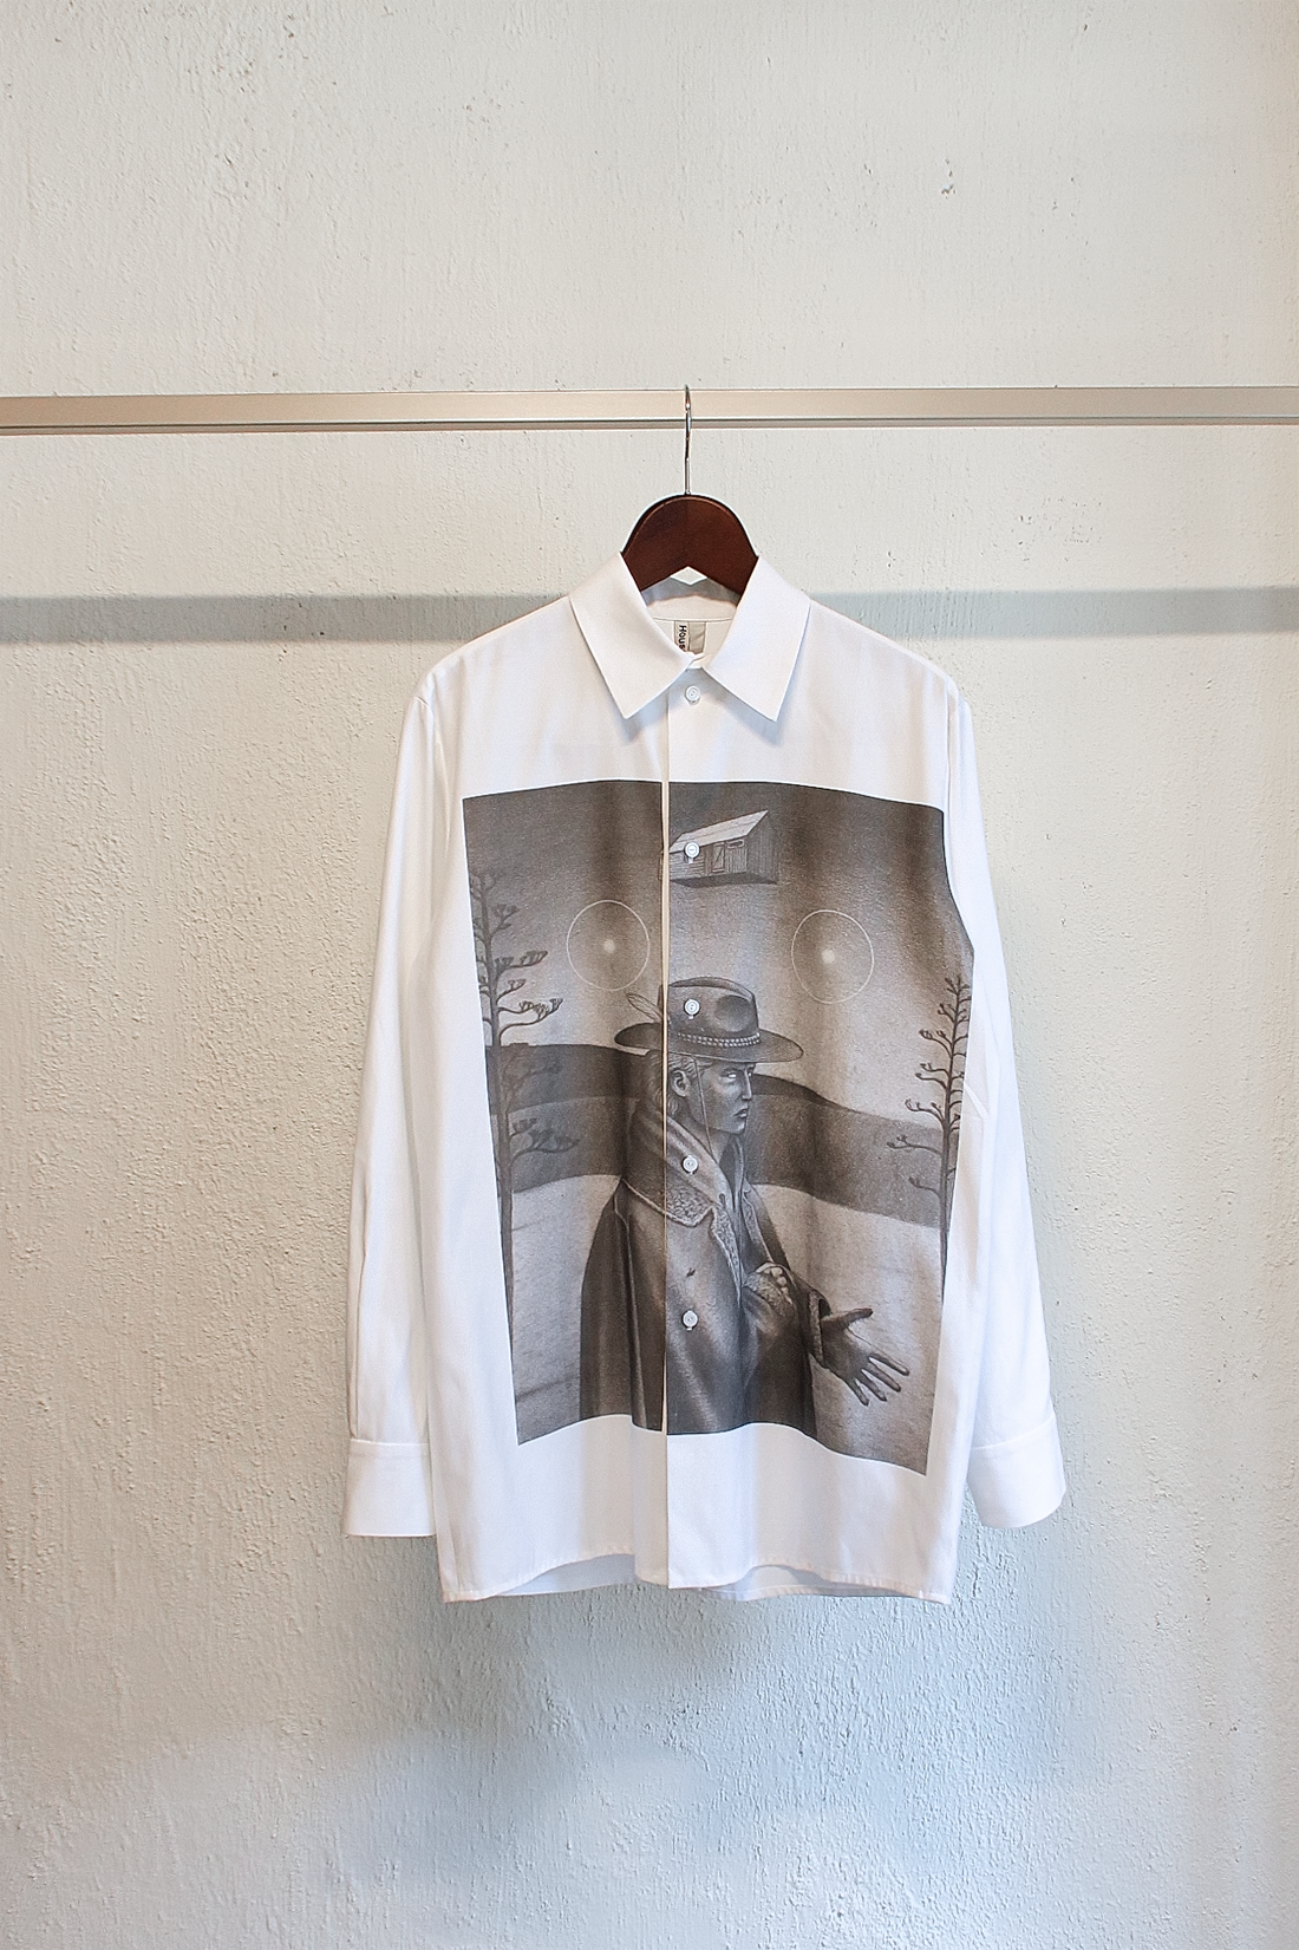 [HOUSE OF LEO] White Cotton Shirt with “COWBOY” Print